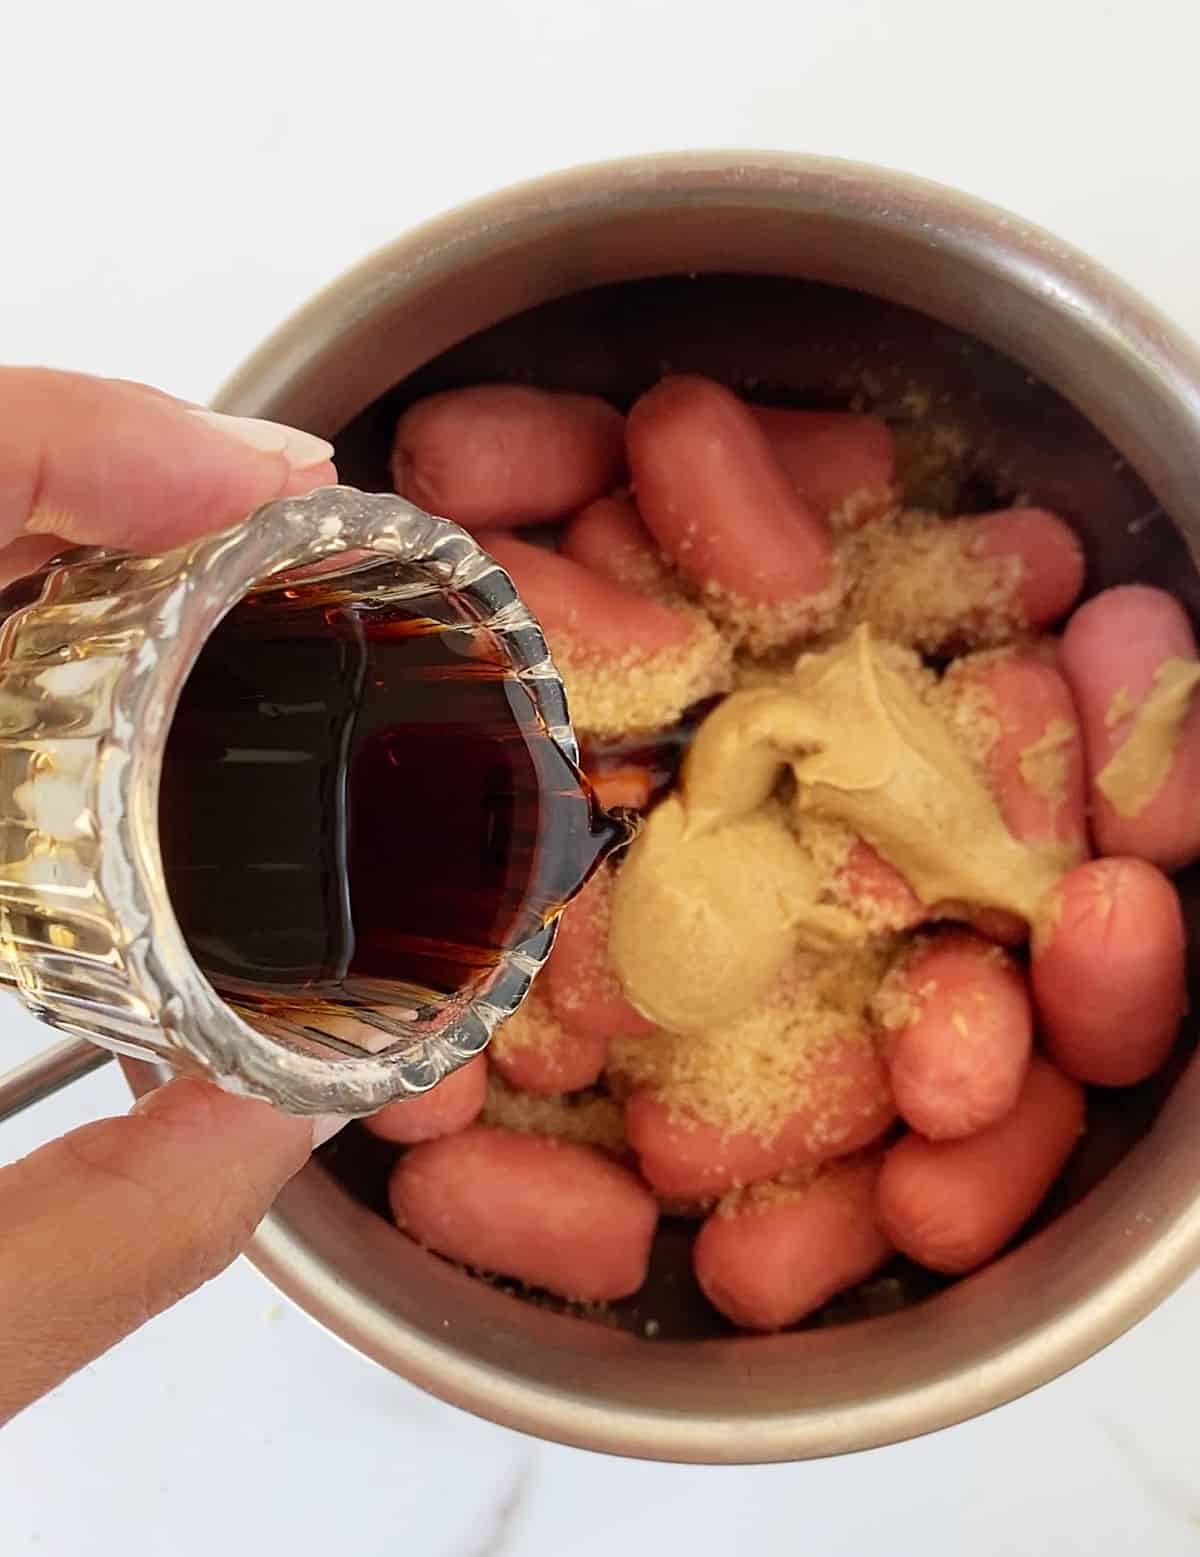 Adding soy sauce to metal saucepan with cocktail sausages on white marble surface